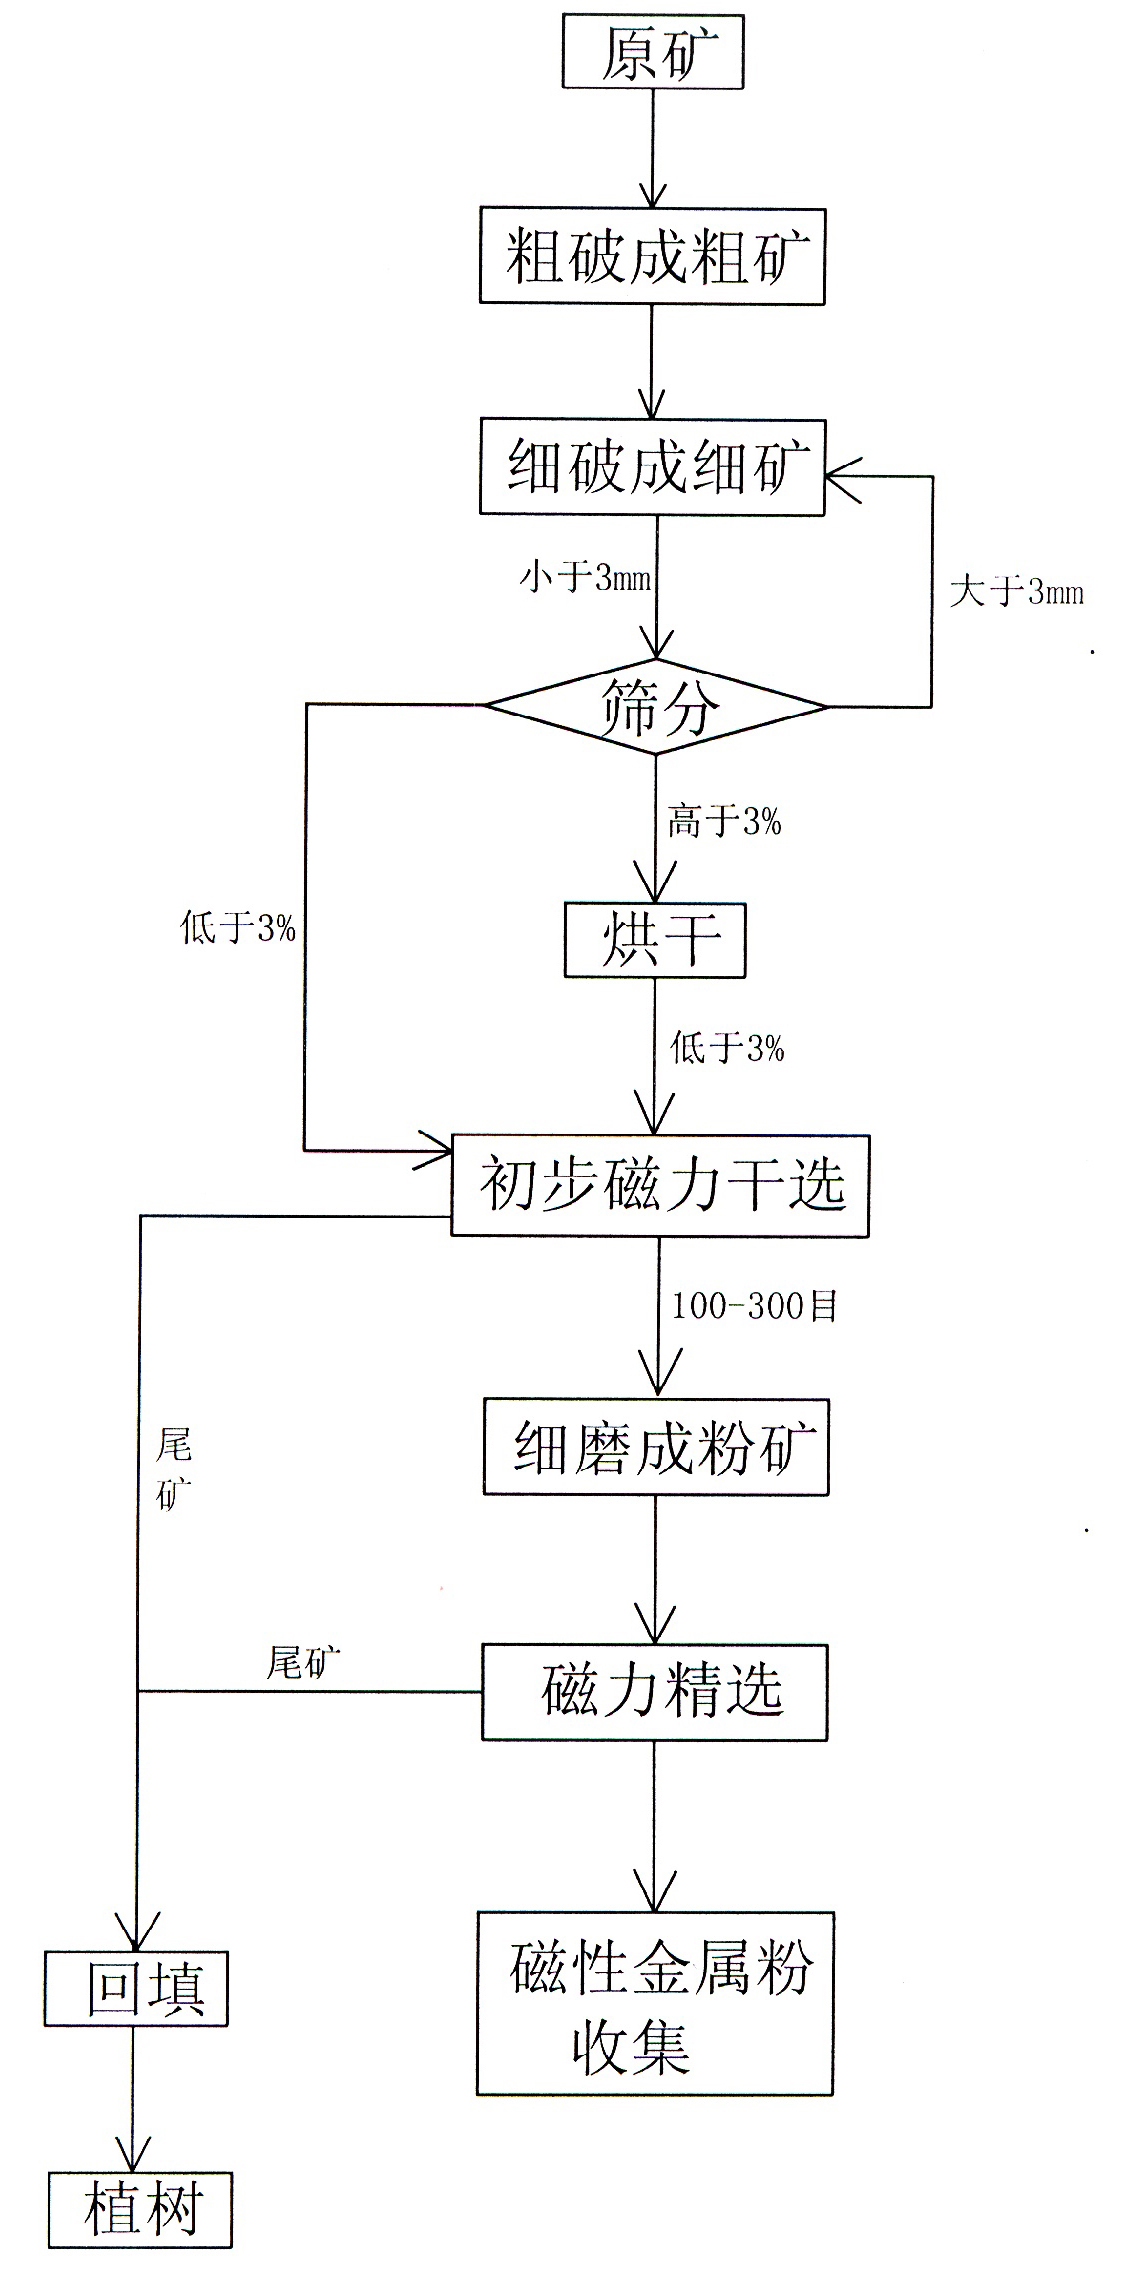 Wind driven permanent magnetic ore dressing method